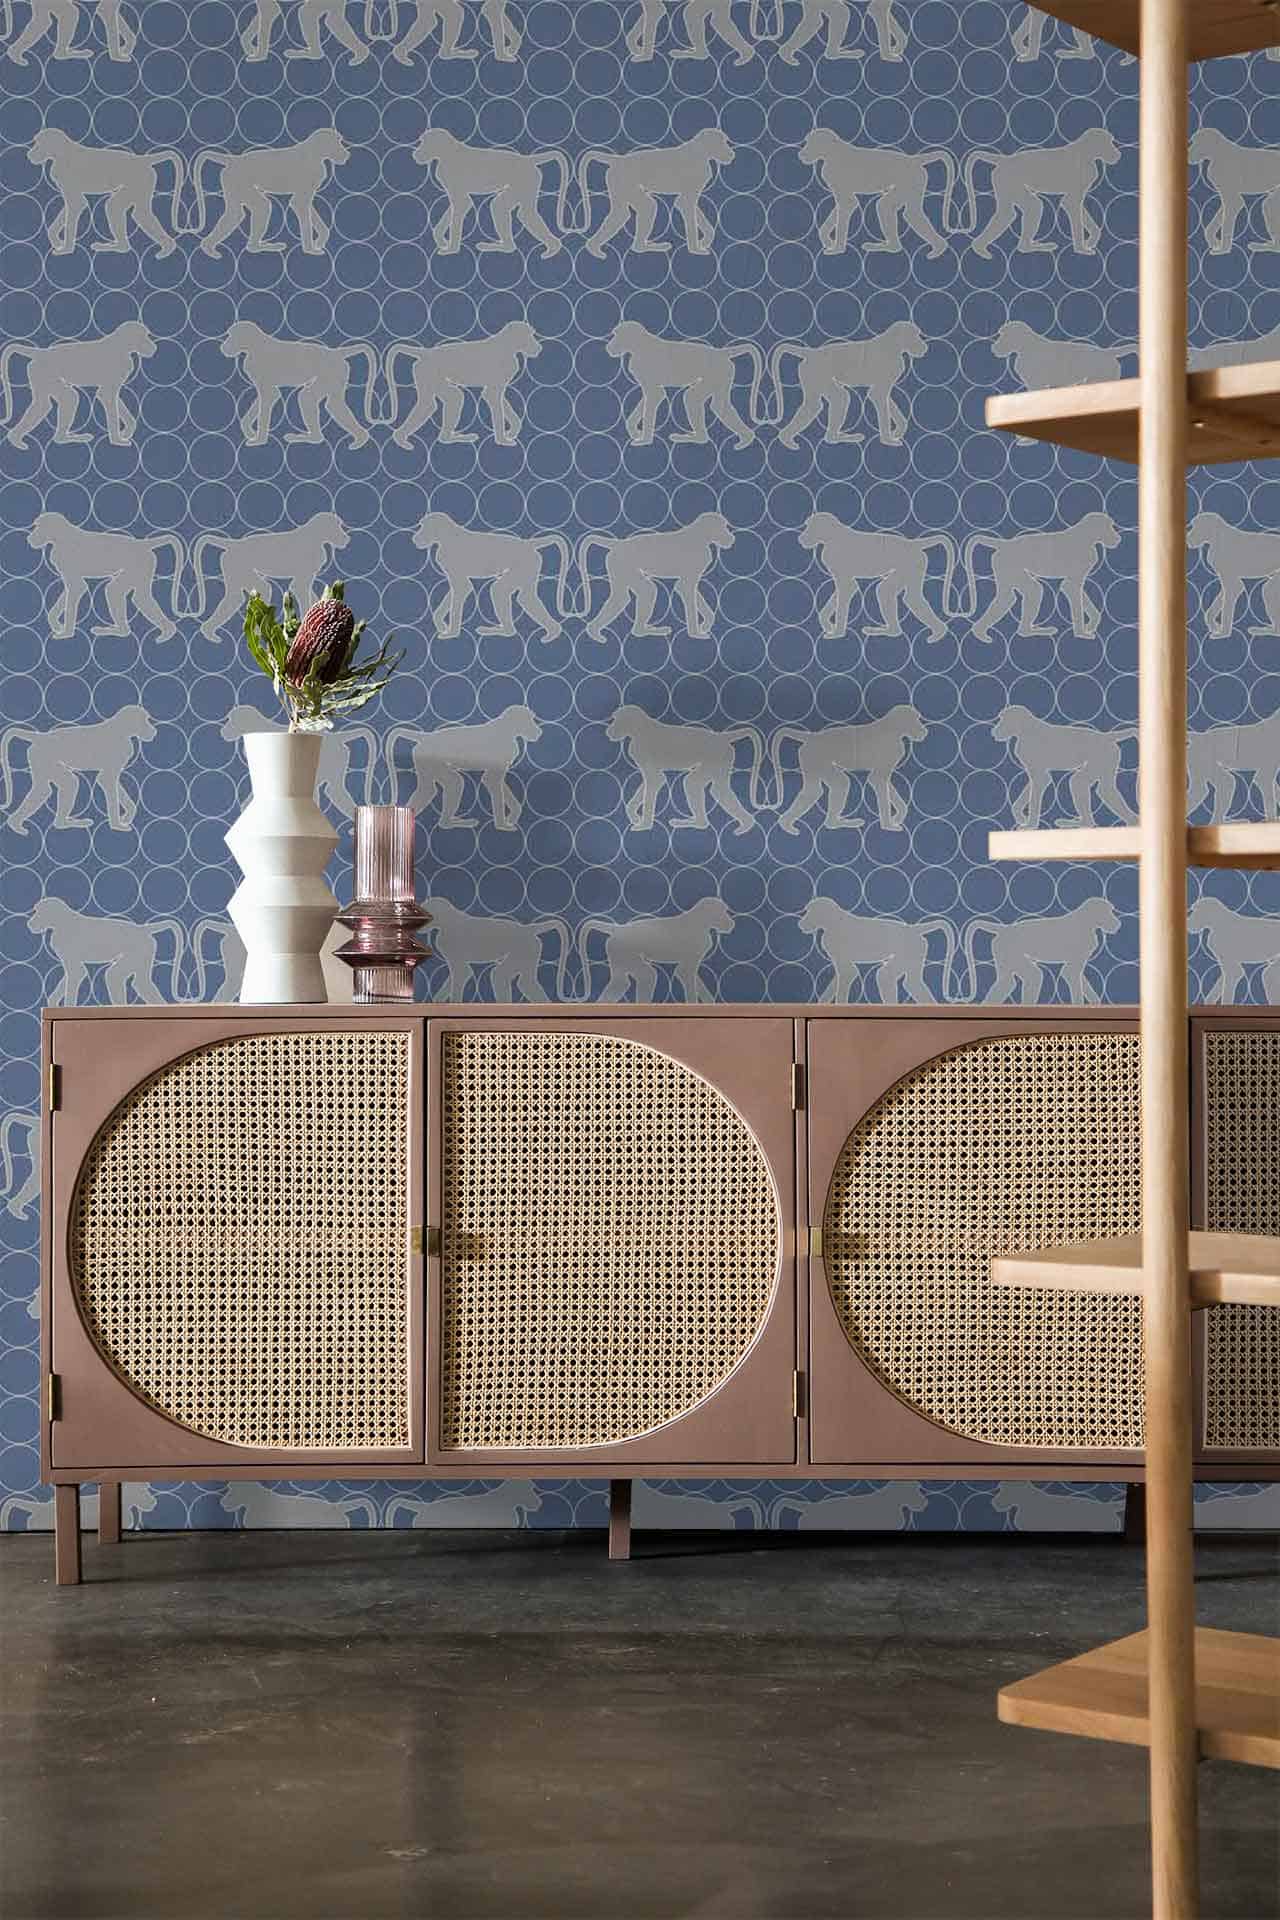 Lady Babs - a CS&Co wallpaper by Rene Veldsman, various baboons forming a pattern